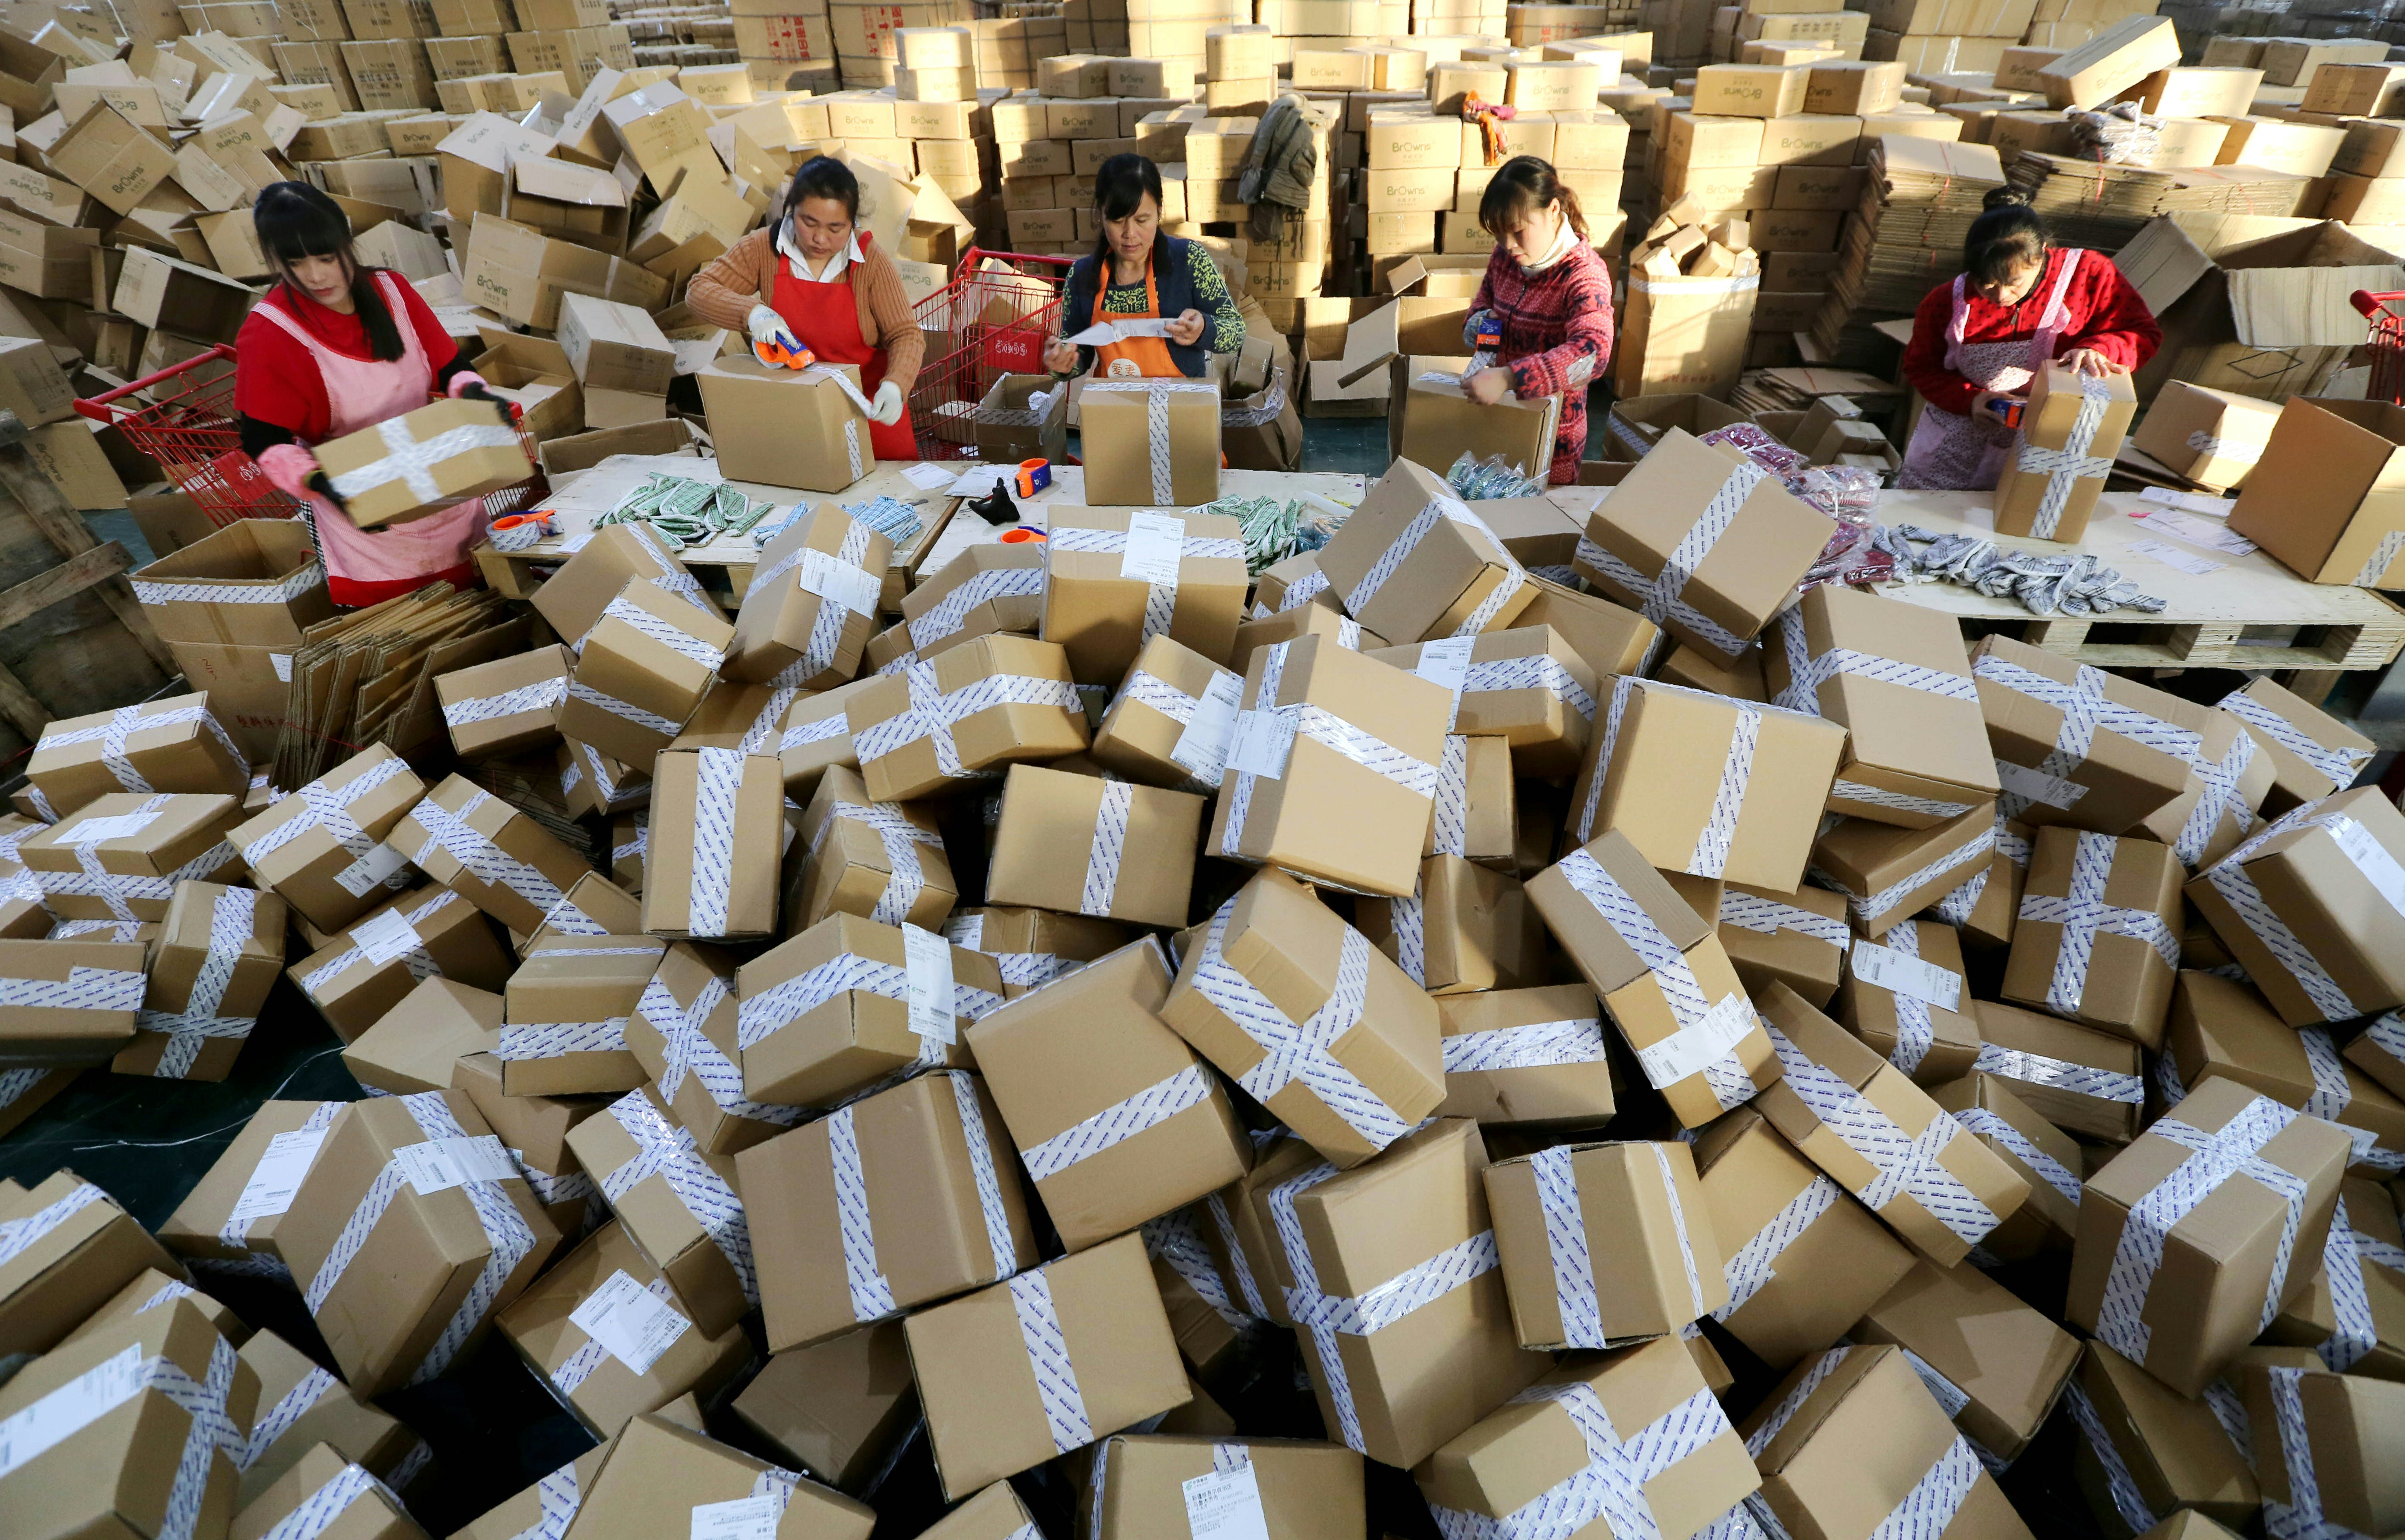 Workers prepare packages for delivery at a sorting center in Lianyungang, Jiangsu province during the Singles Day online shopping festival on November 11, 2016. Chinese shoppers unleashed a record deluge of cash online for Singles Day on November 11, Alibaba said, spending RMB 120.7 billion (USD17.8 billion) with the e-commerce giant in the world's biggest online shopping promotion. / AFP PHOTO / STR / China OUT